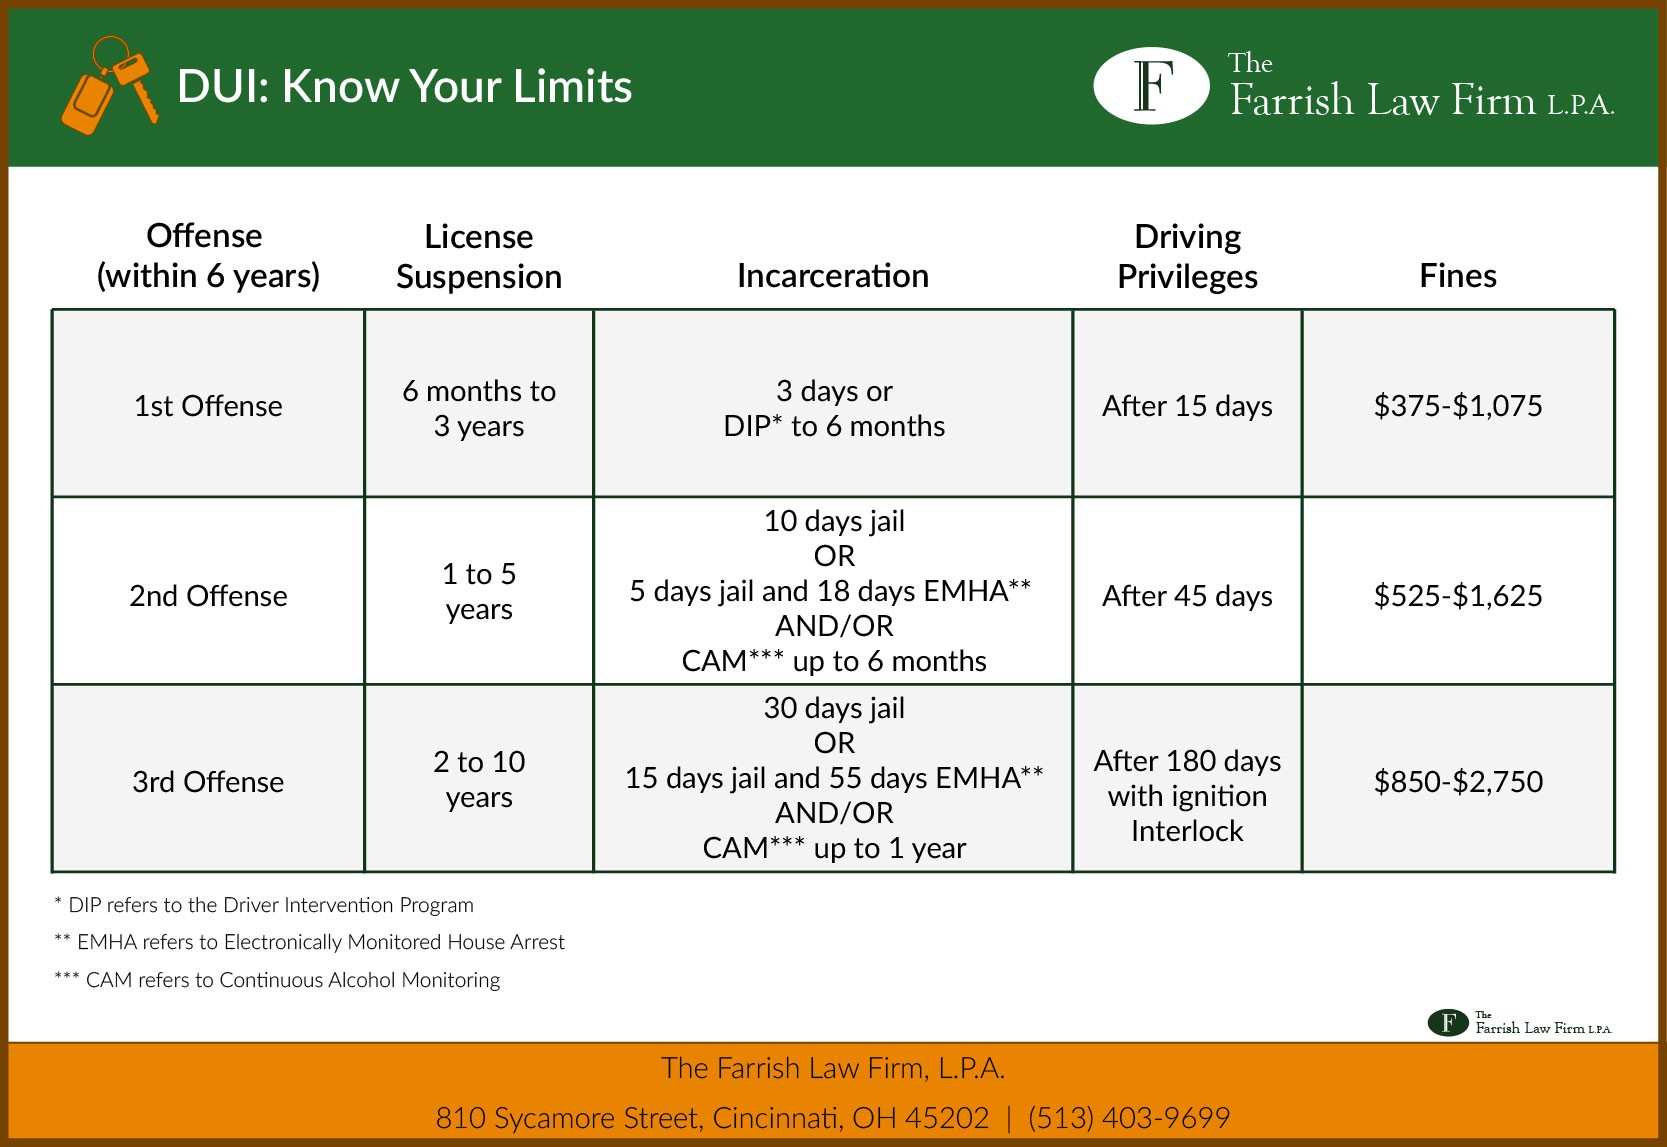 DUI-Know-Your-Limits